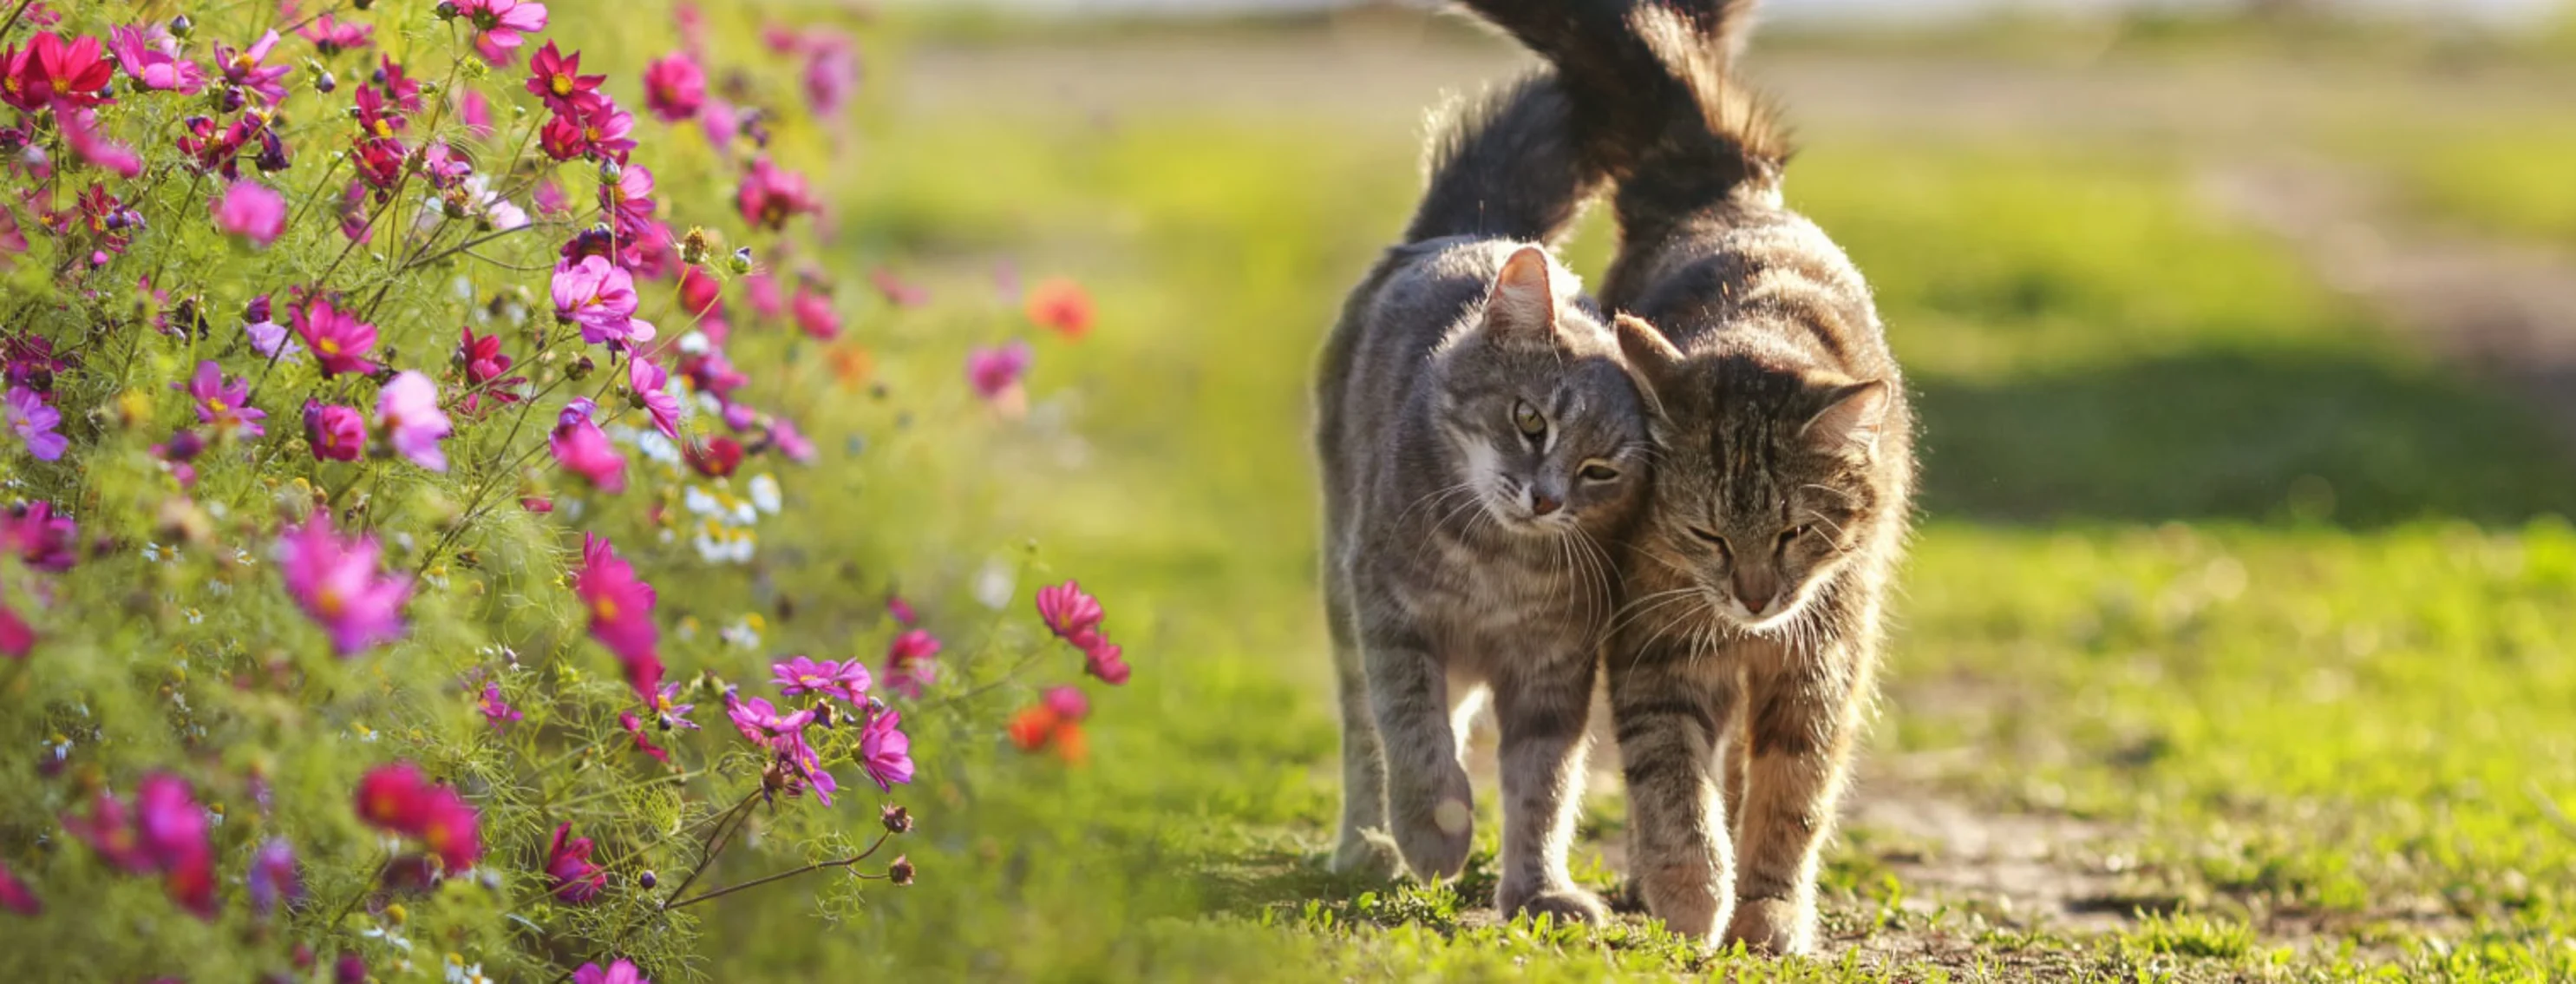 Two cats walking side by side together.